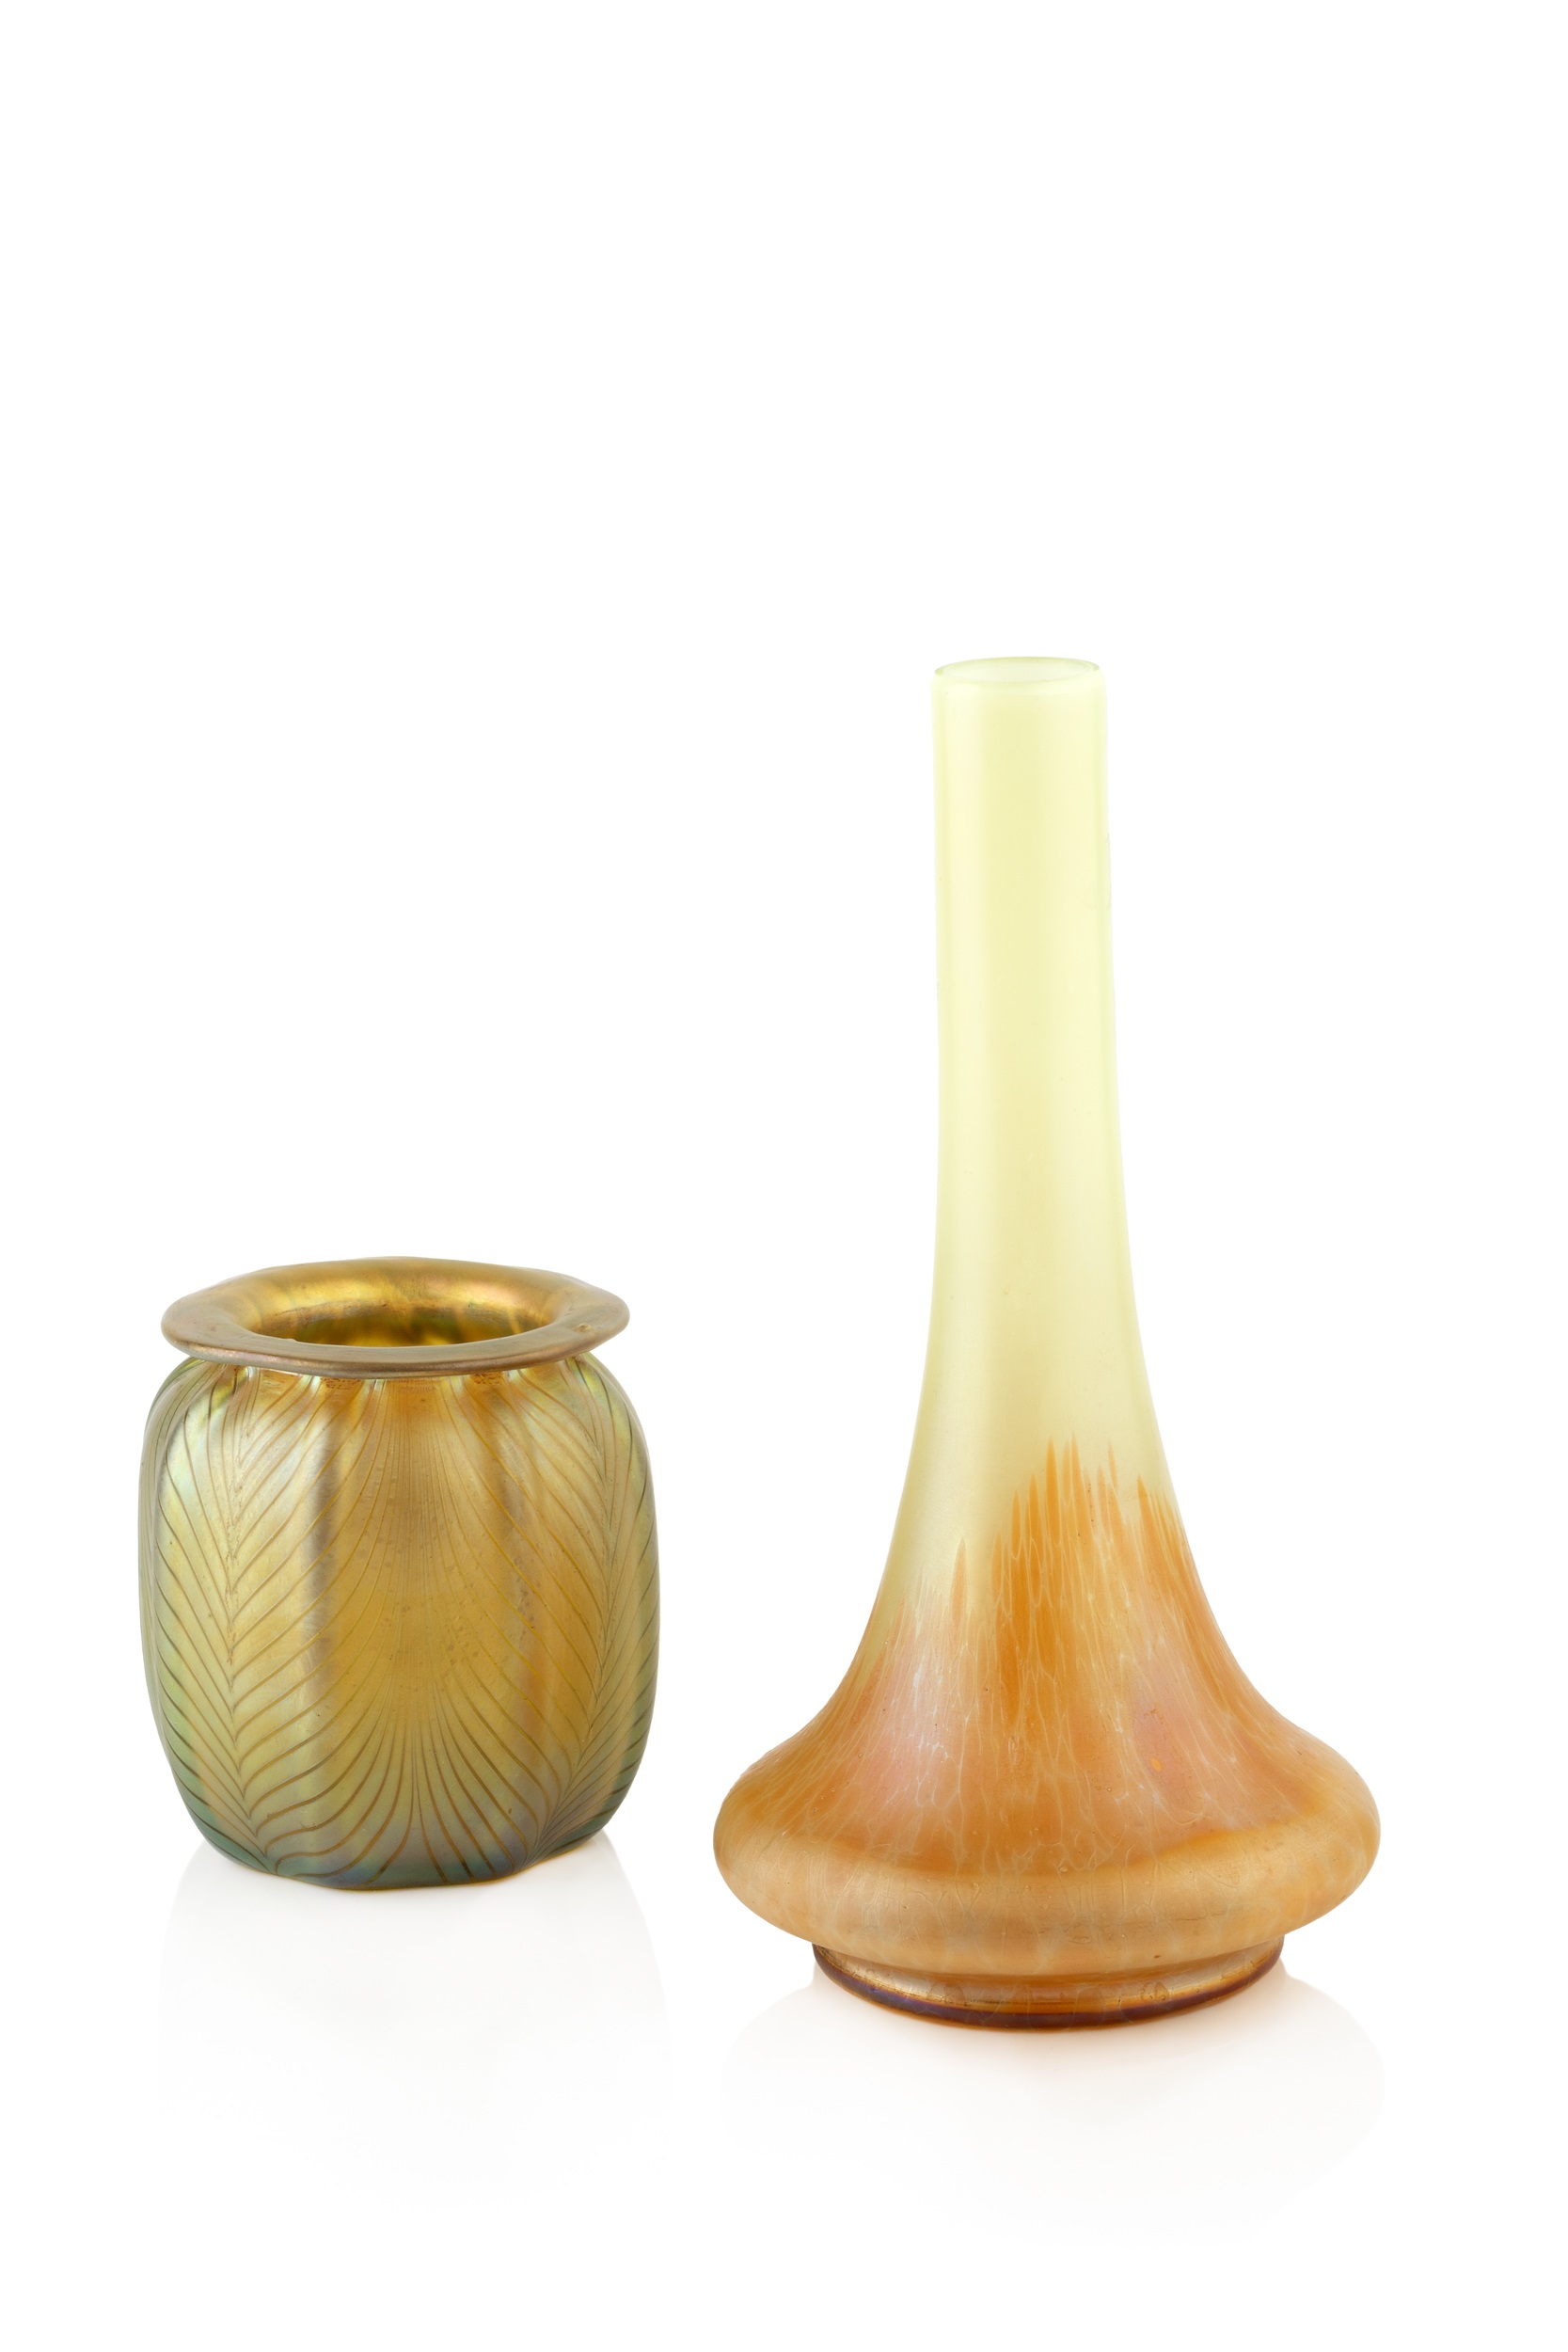 Manner of Tiffany Favrile-style glass vase etched 'L.F' 9cm high; and a similar glass bottle vase,